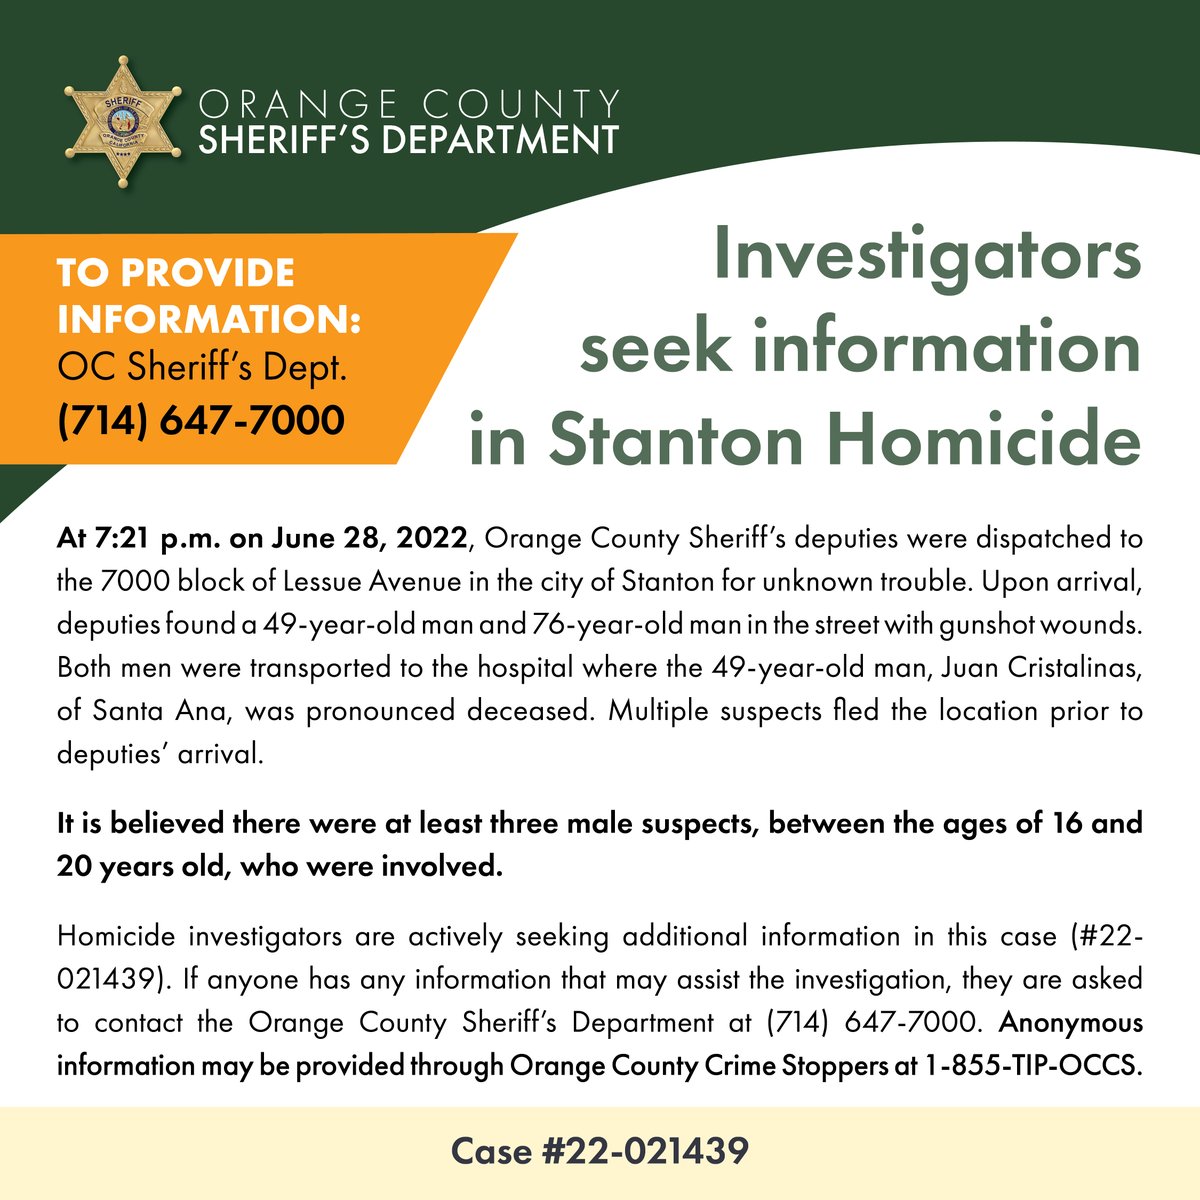 OC Sheriff investigators are seeking additional info about a homicide that occurred in the city of Stanton on June 28th, 2022. Please call dispatch at 714-647-7000 if you have any information.